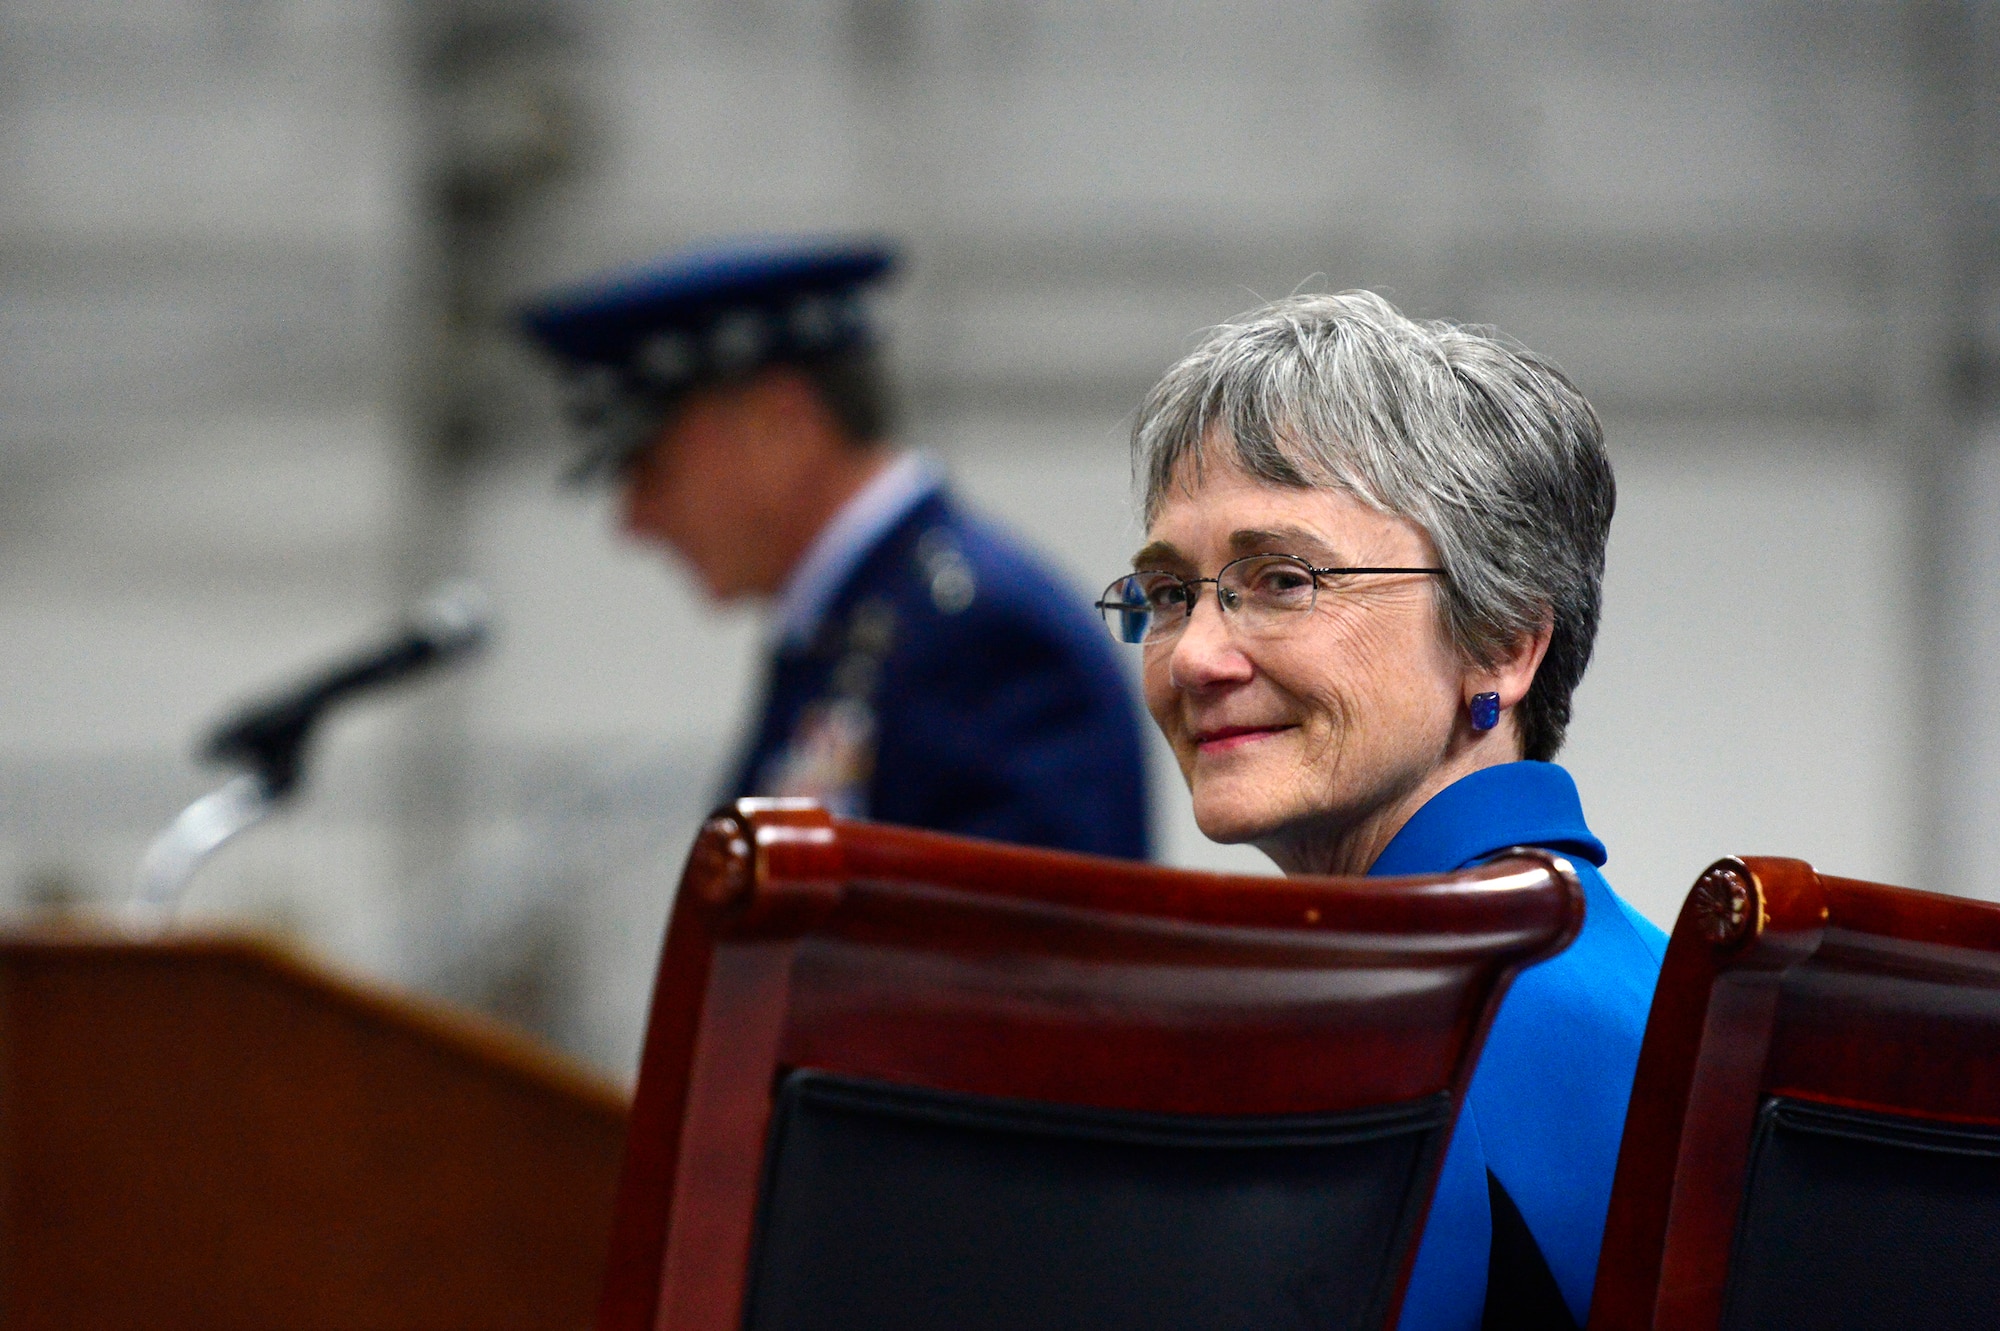 Secretary of the Air Force Heather Wilson listens as Air Force Chief of Staff Gen. David L. Goldfein gives his remarks during her farewell ceremony at Joint Base Andrews, Md., May, 21,2019.  (U.S. Air Force photo by Staff Sgt. Rusty Frank)